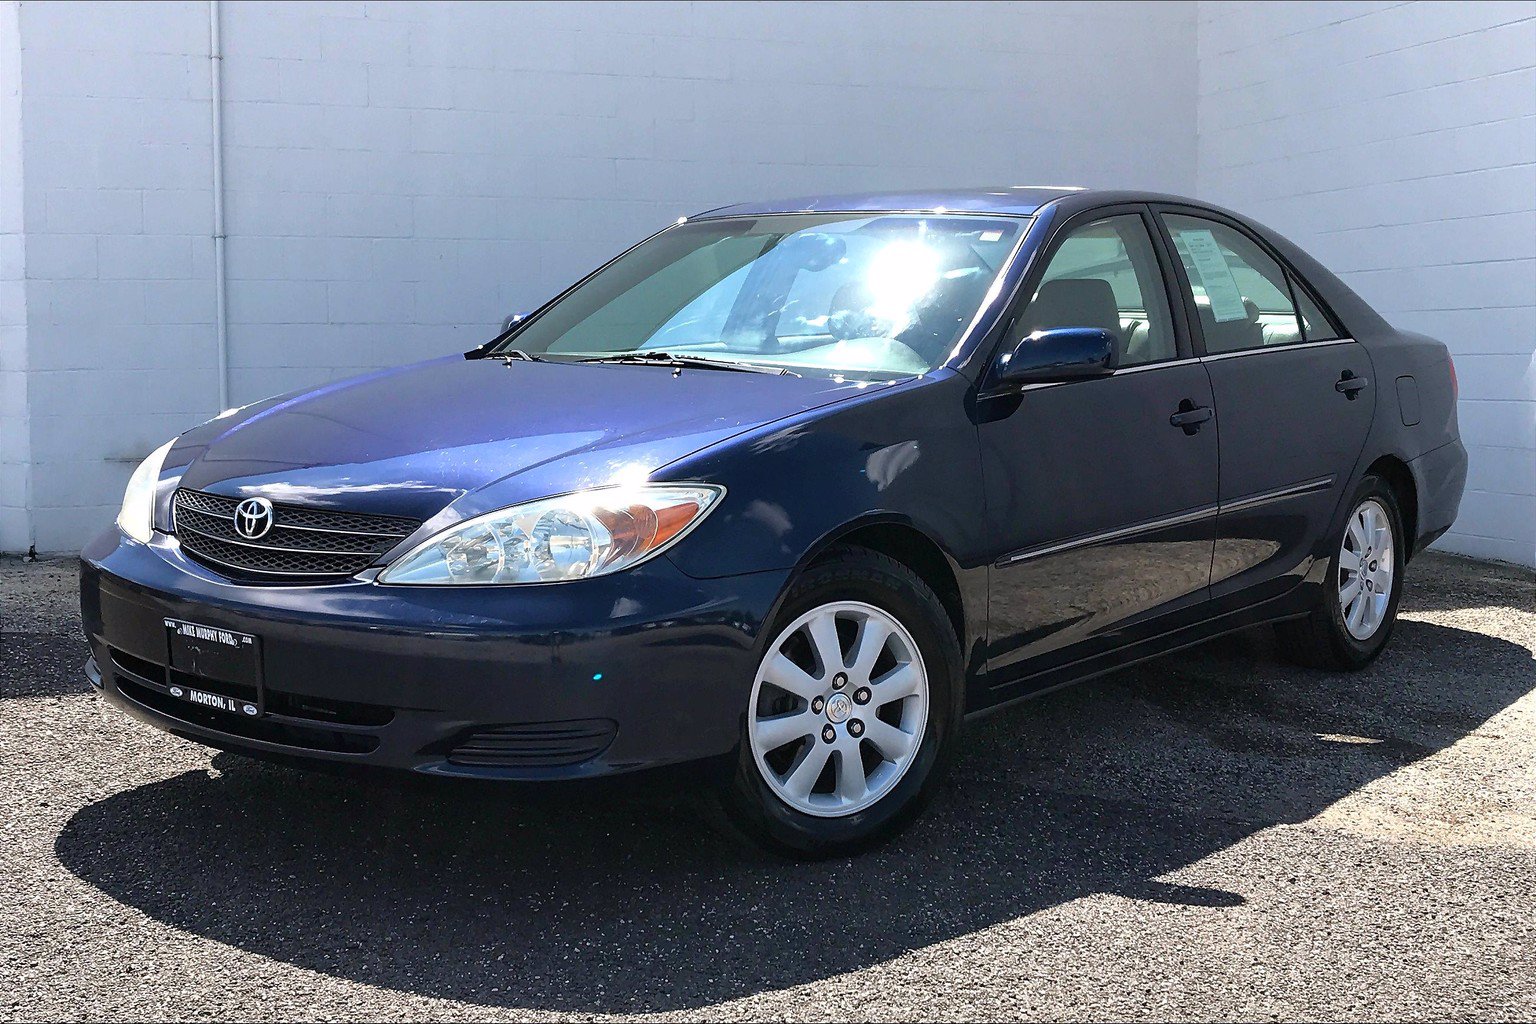 Pre-Owned 2002 Toyota Camry XLE 4D Sedan in Morton #538177 | Mike